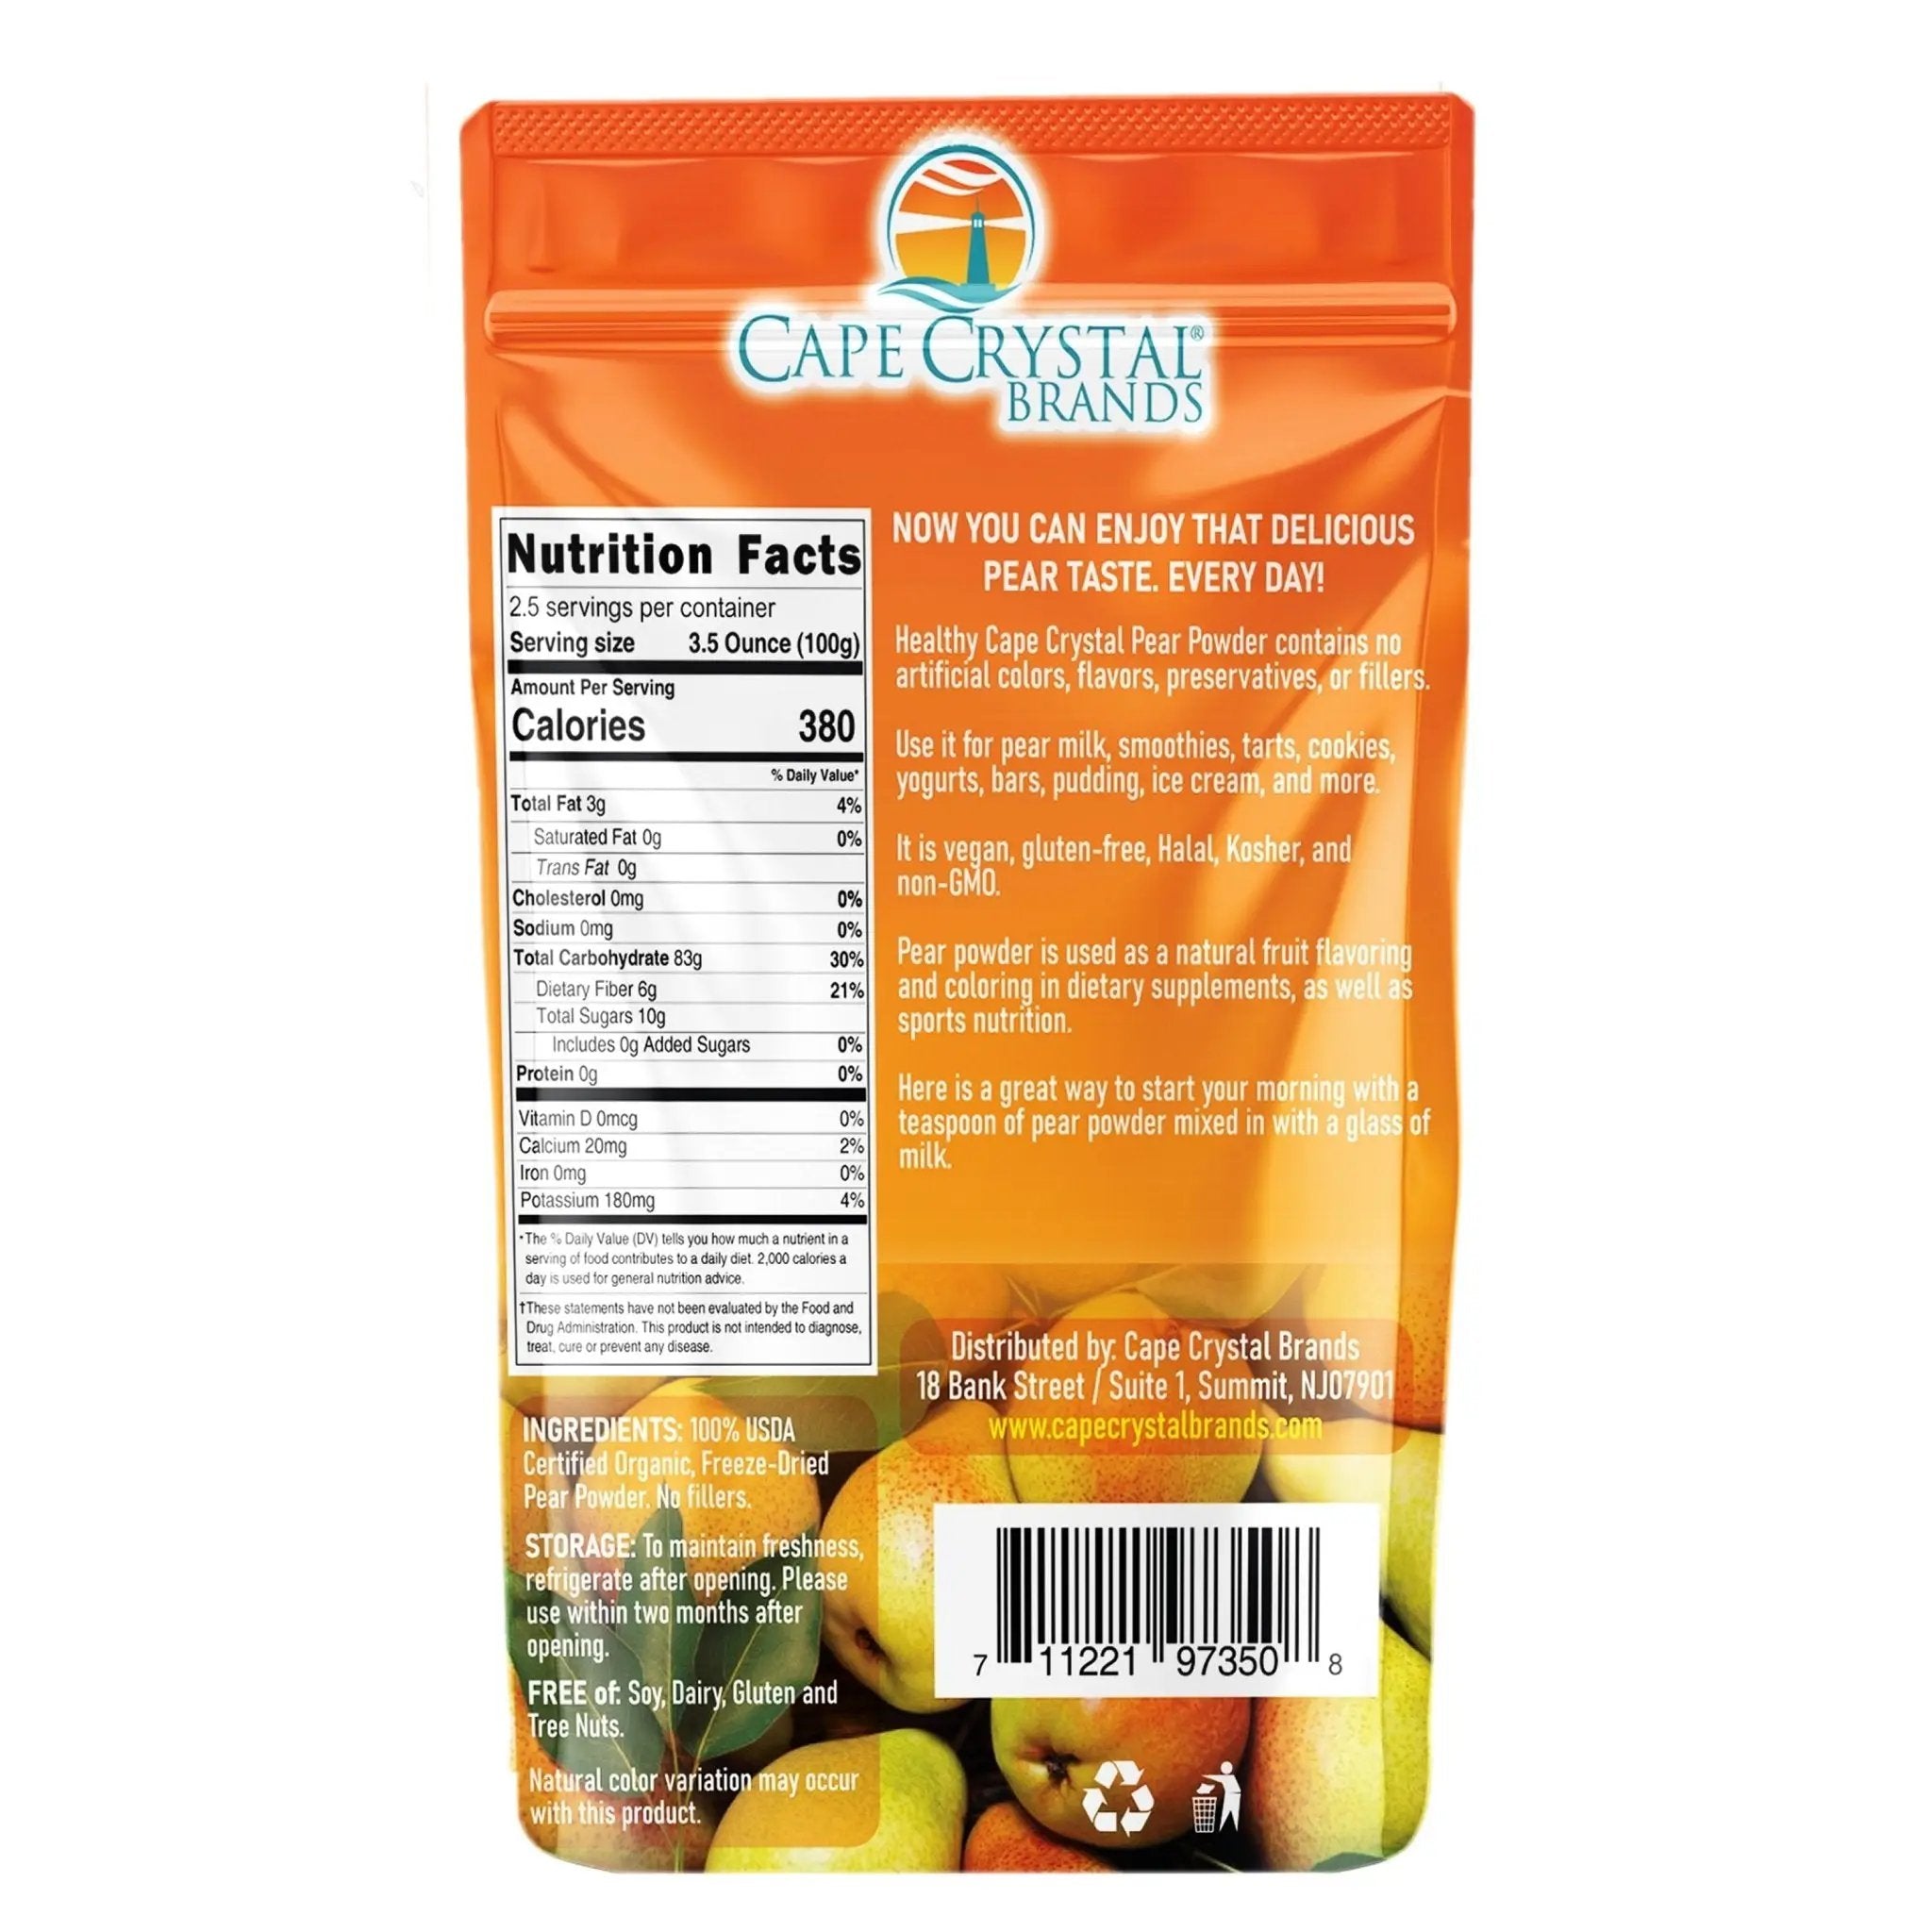 Cape Crystal Brands - Freeze-Dried Pear Powder - No added preservatives - 8 oz / 226 gm